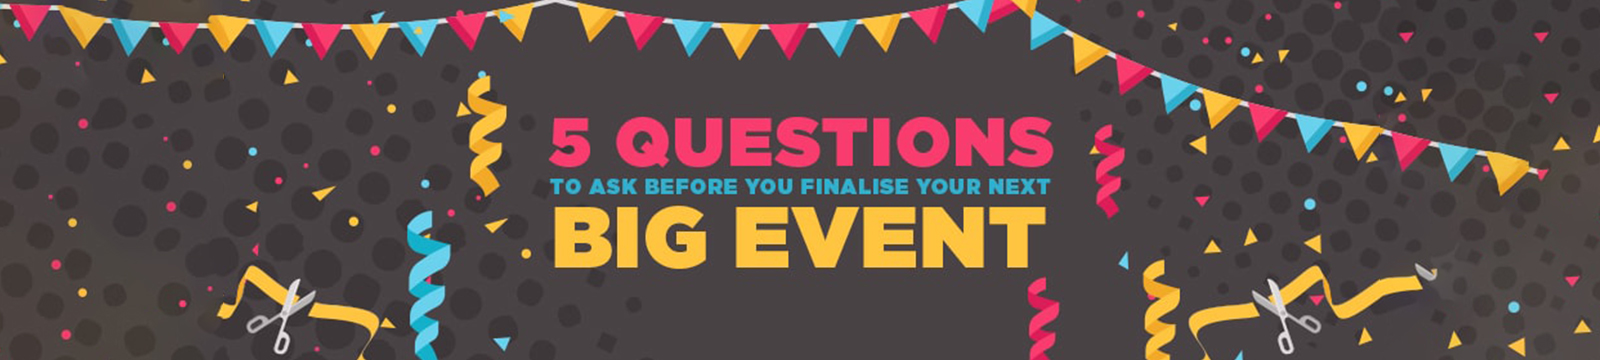 5 Questions to Ask Before You Finalise Your Next Big Event